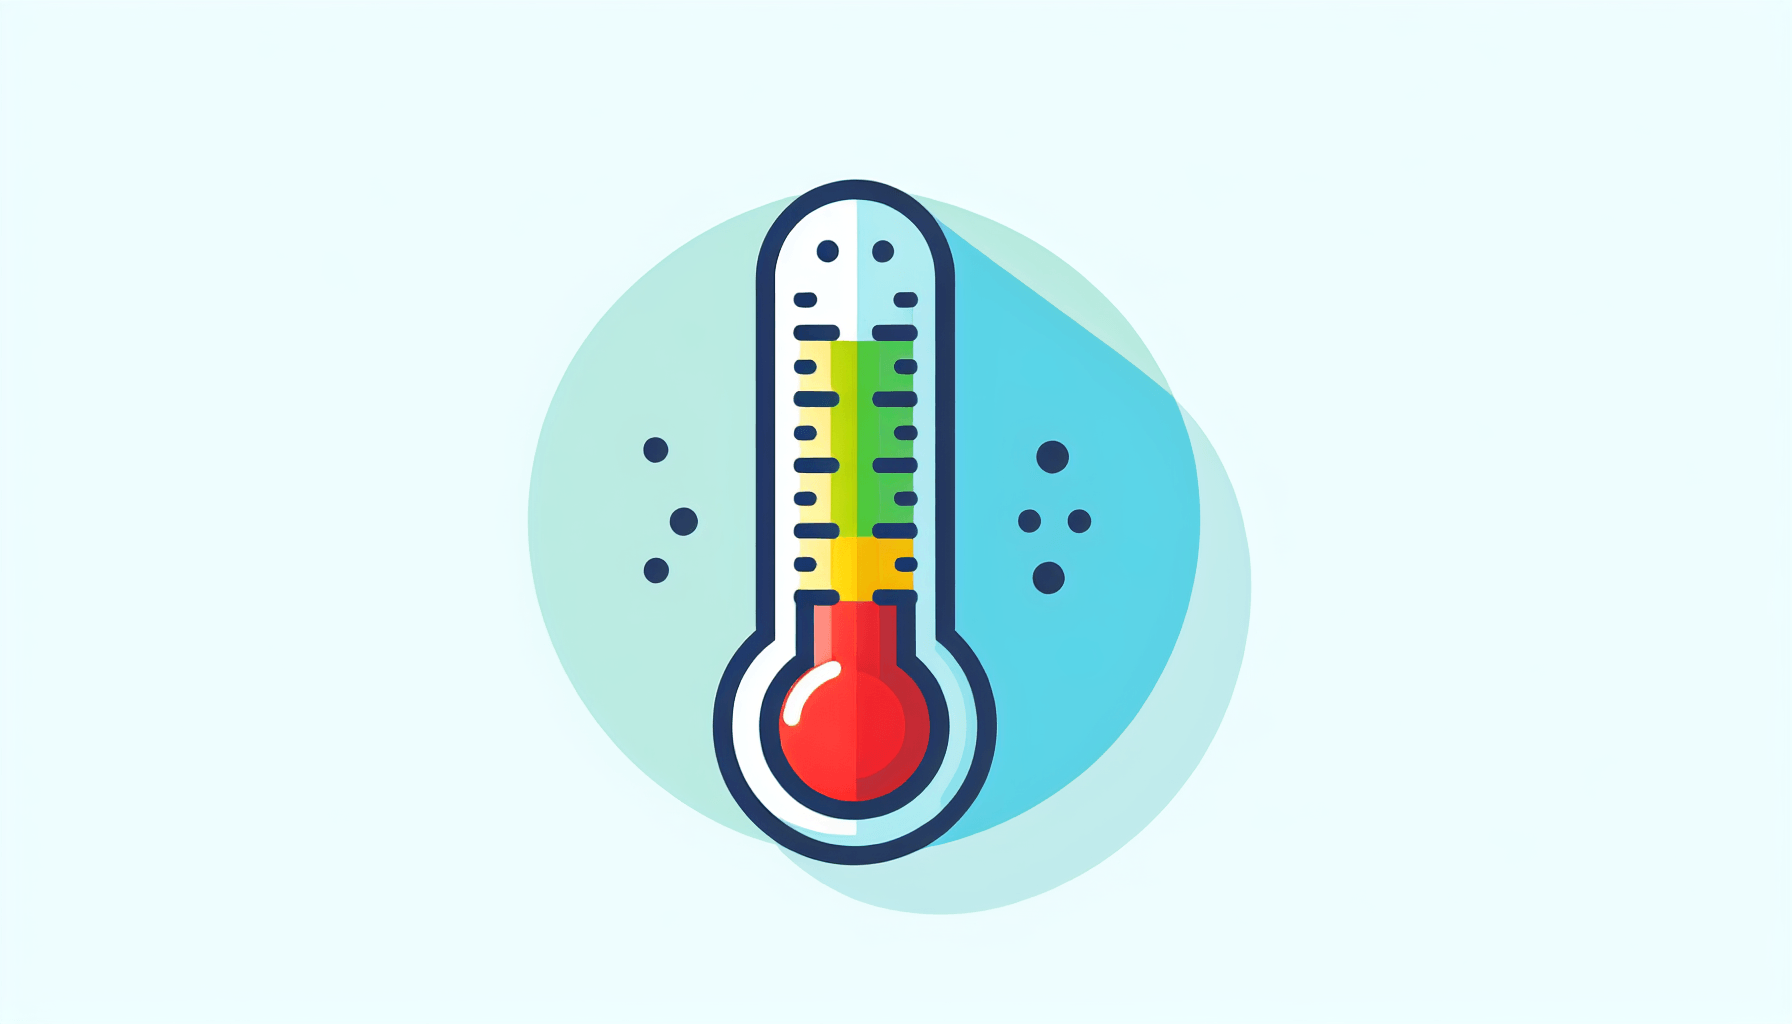 Thermometer in flat illustration style and white background, red #f47574, green #88c7a8, yellow #fcc44b, and blue #645bc8 colors.